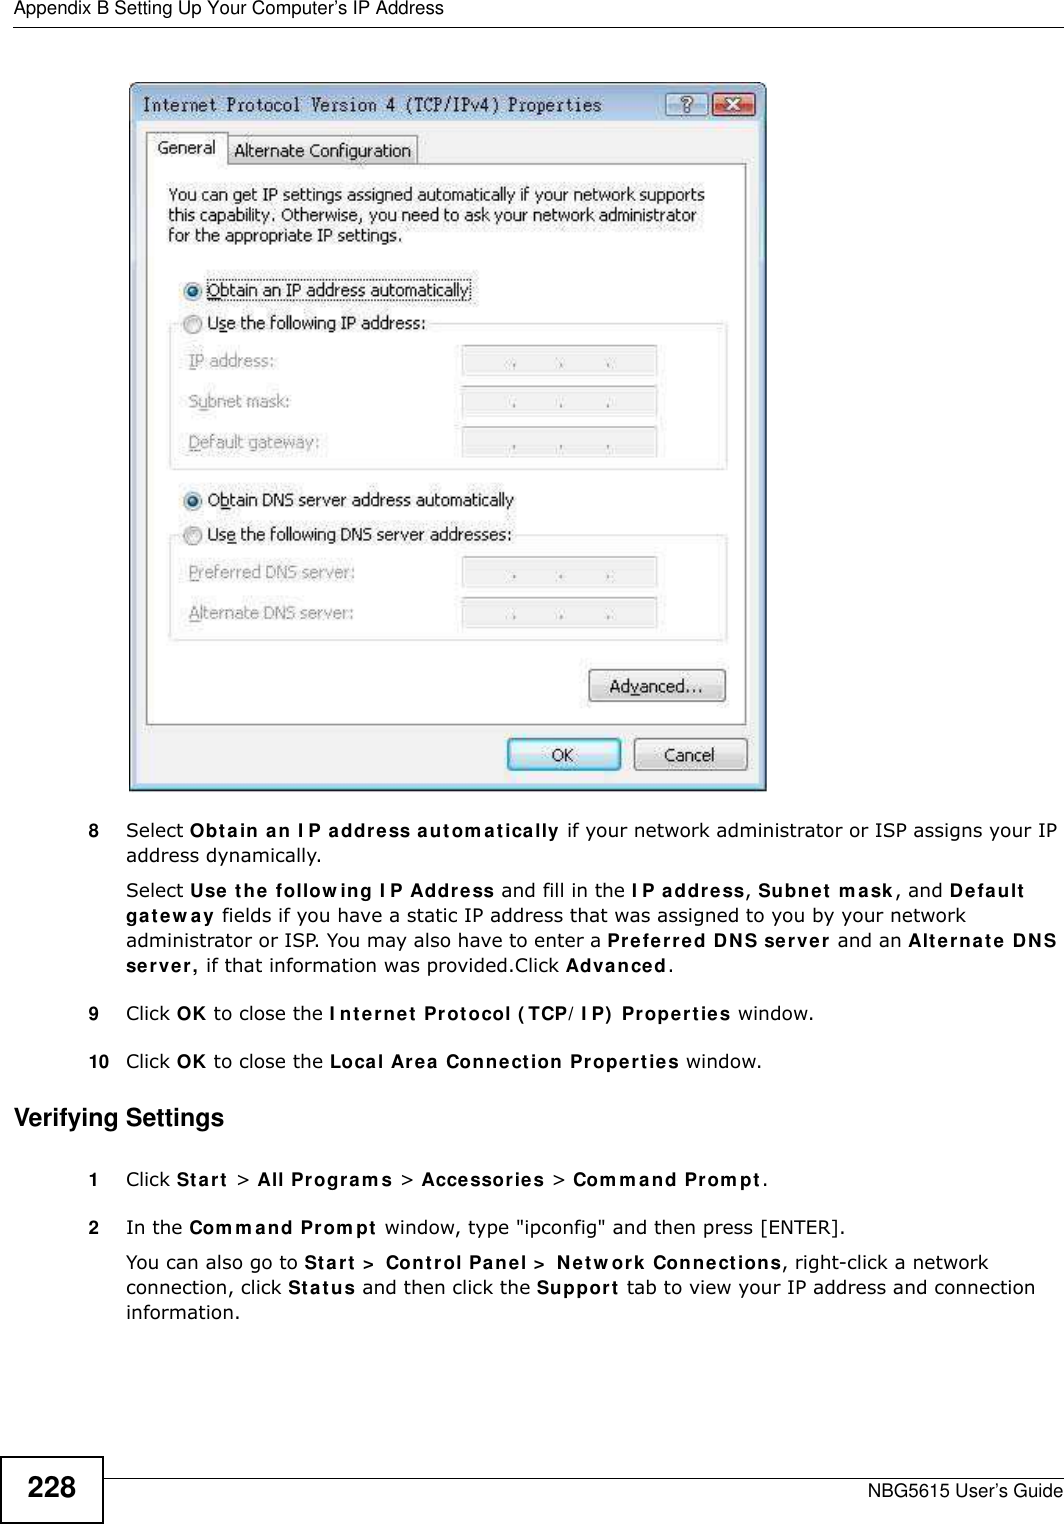 Appendix B Setting Up Your Computer’s IP AddressNBG5615 User’s Guide2288Select Obtain an I P address autom atically if your network administrator or ISP assigns your IP address dynamically.Select Use the follow ing I P Address and fill in the I P address, Subnet mask, and Default gatew ay fields if you have a static IP address that was assigned to you by your network administrator or ISP. You may also have to enter a Preferred DNS server and an Alternate DNS server, if that information was provided.Click Advanced.9Click OK to close the I nternet Protocol ( TCP/ I P)  Properties window.10 Click OK to close the Local Area Connection Properties window.Verifying Settings1Click Start &gt; All Program s &gt; Accessories &gt; Com m and Prompt.2In the Com m and Prom pt window, type &quot;ipconfig&quot; and then press [ENTER]. You can also go to Start &gt;  Control Panel &gt;  Netw ork Connections, right-click a network connection, click Status and then click the Support tab to view your IP address and connection information.